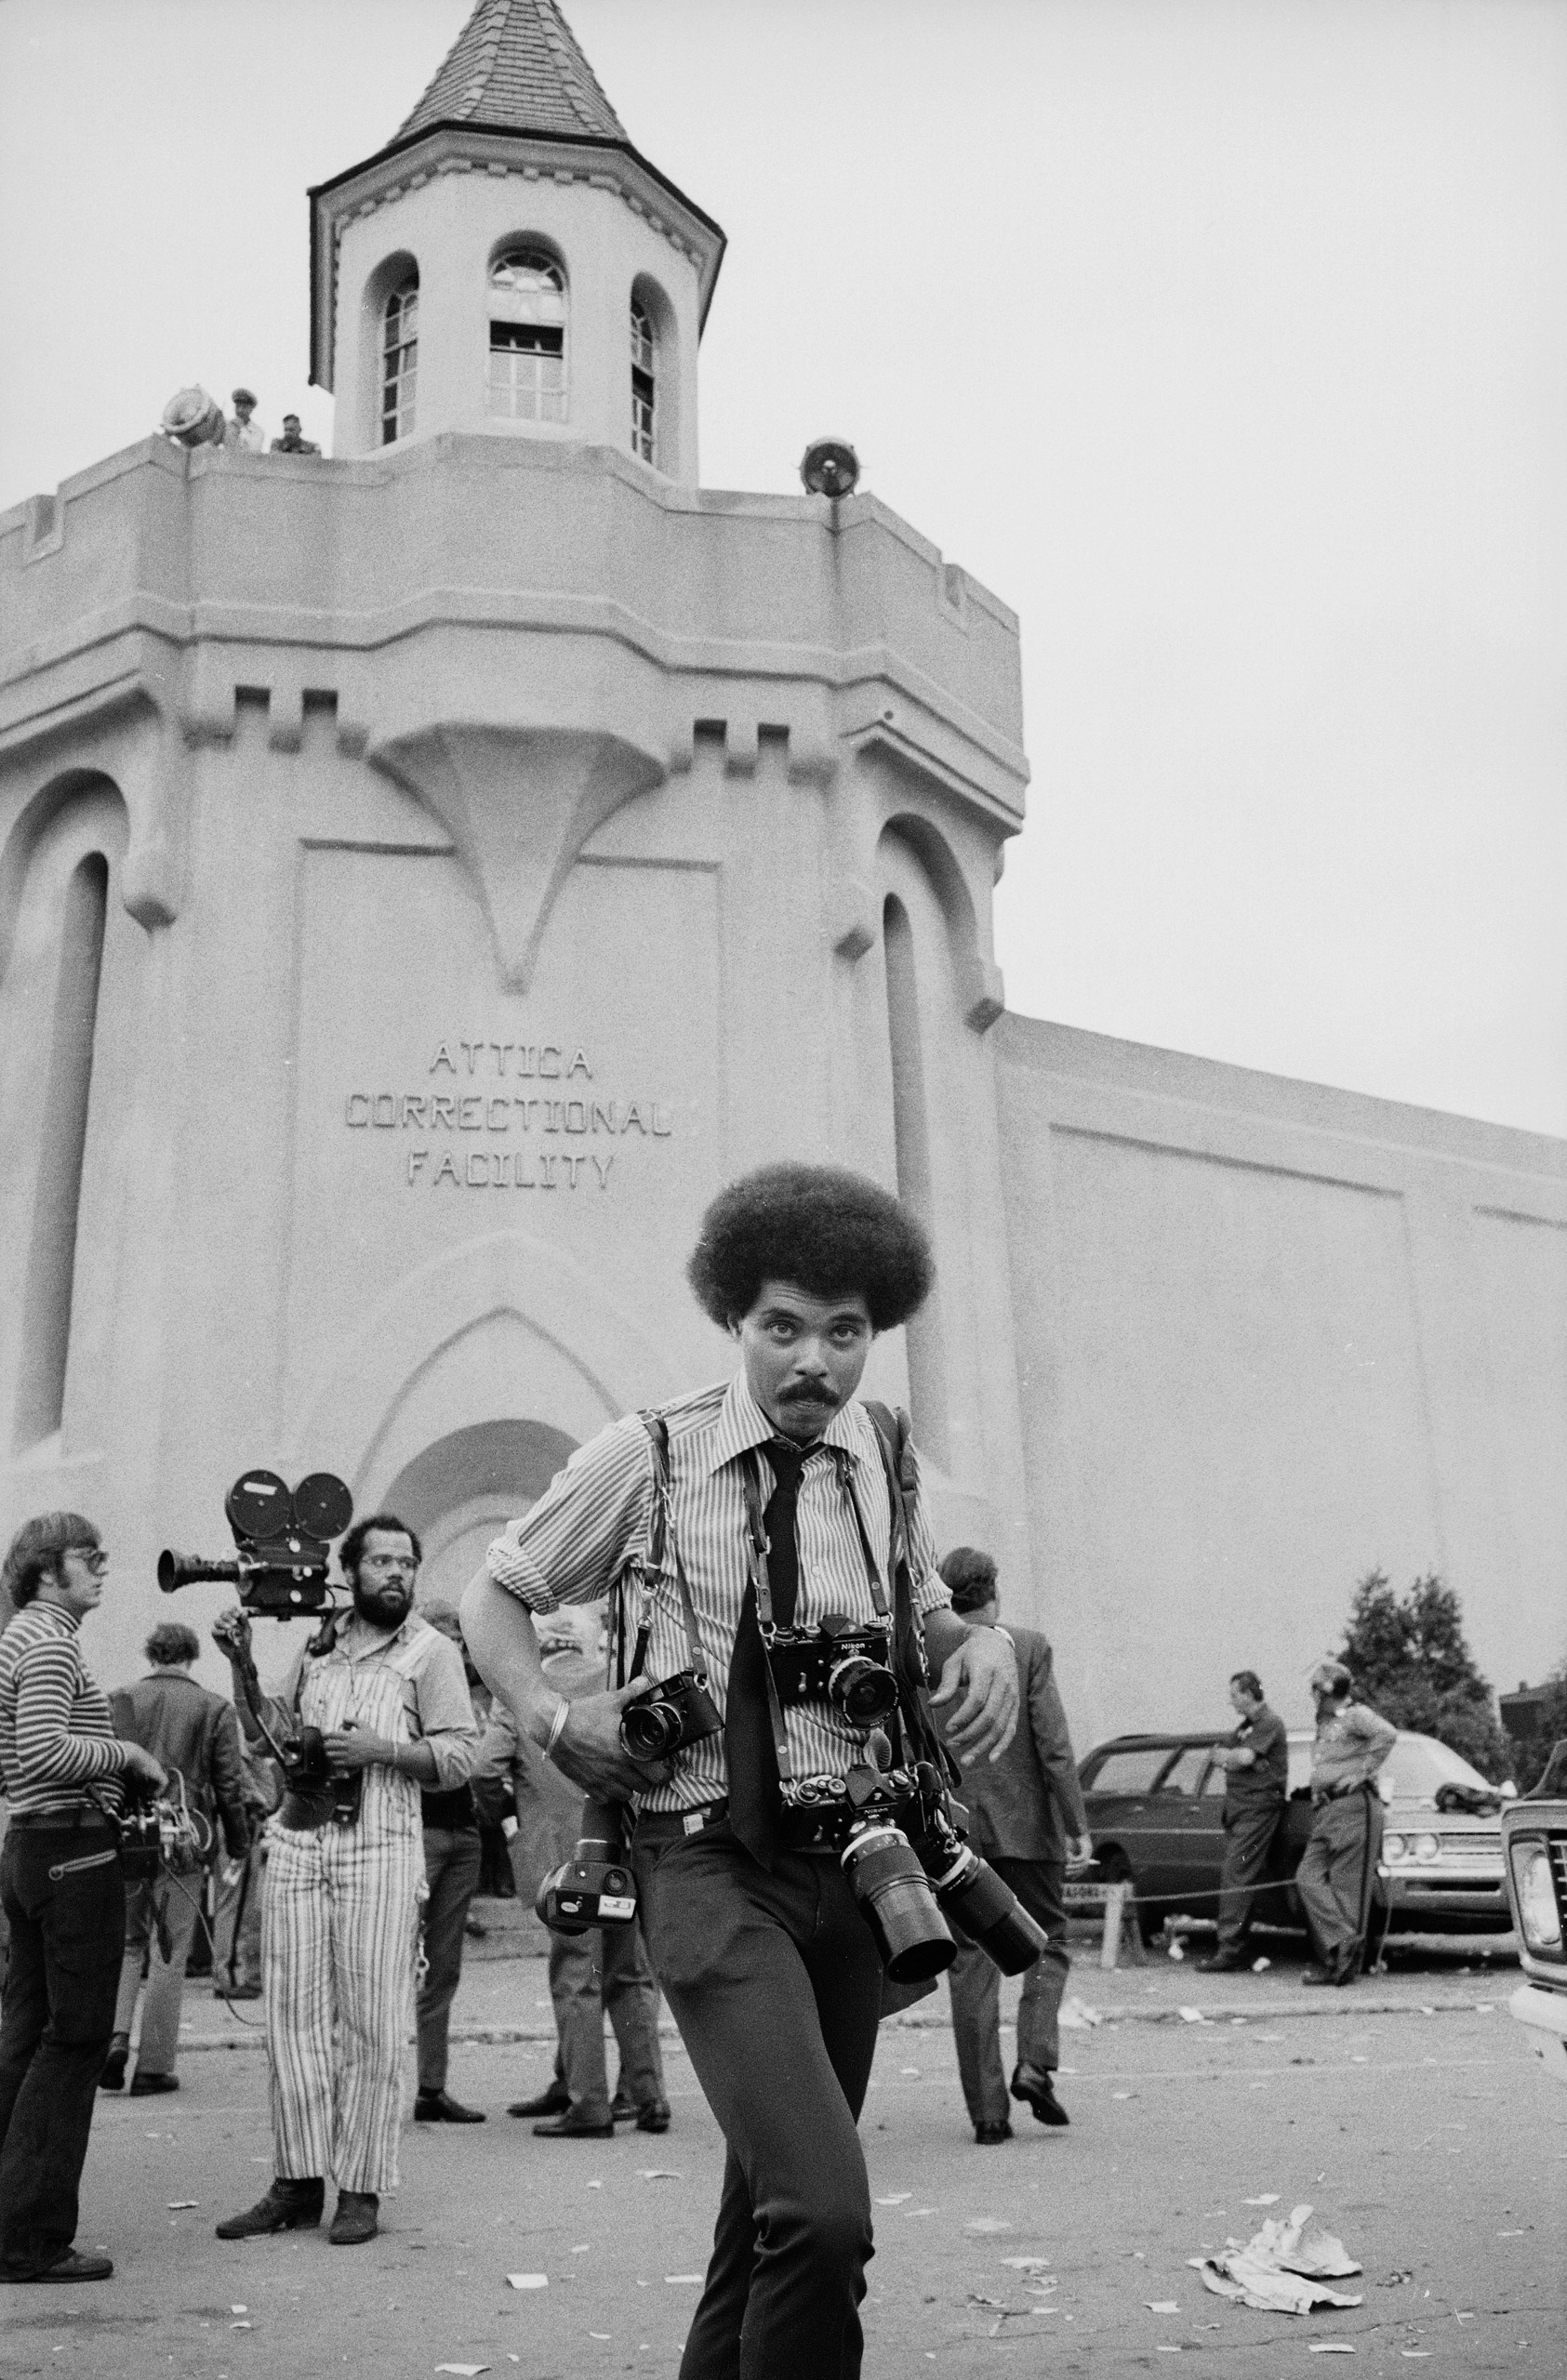 LIFE photographer John Shearer on assignment outside Attica prison during a prisoner riot and uprising.